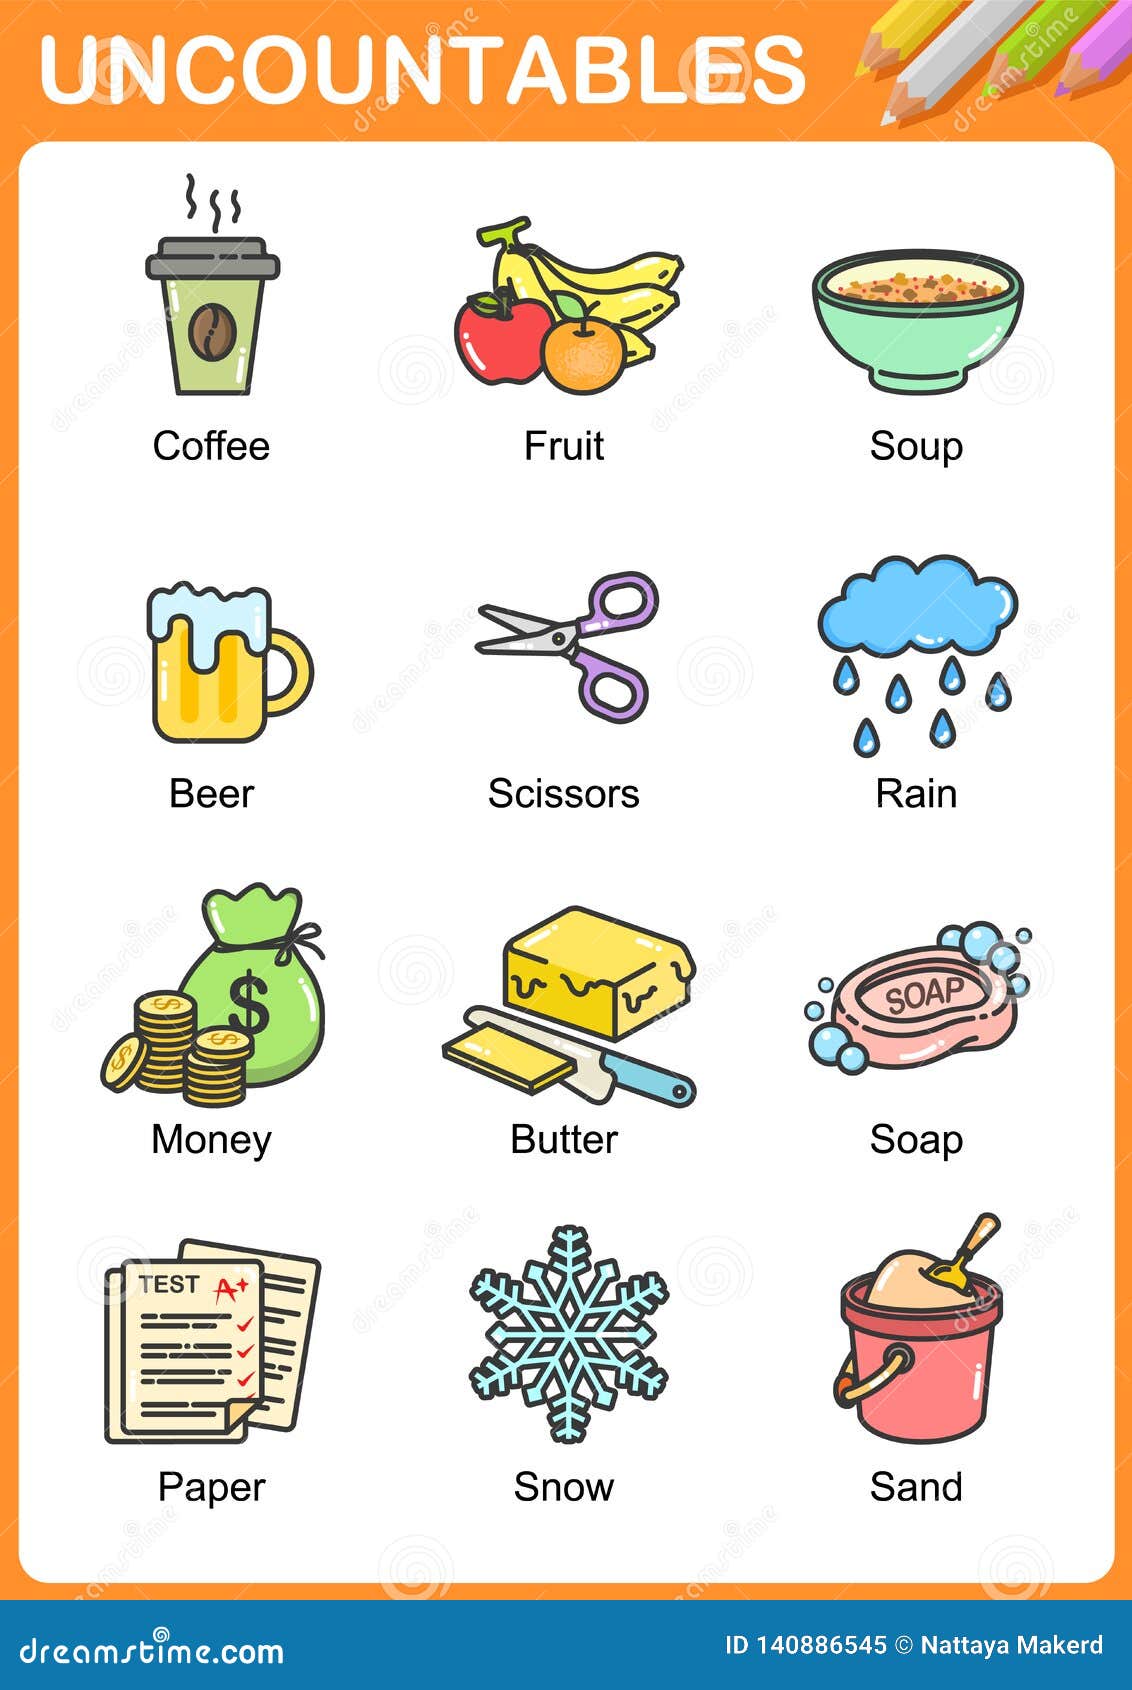 countable-and-uncountable-nouns-images-countable-and-uncountable-food